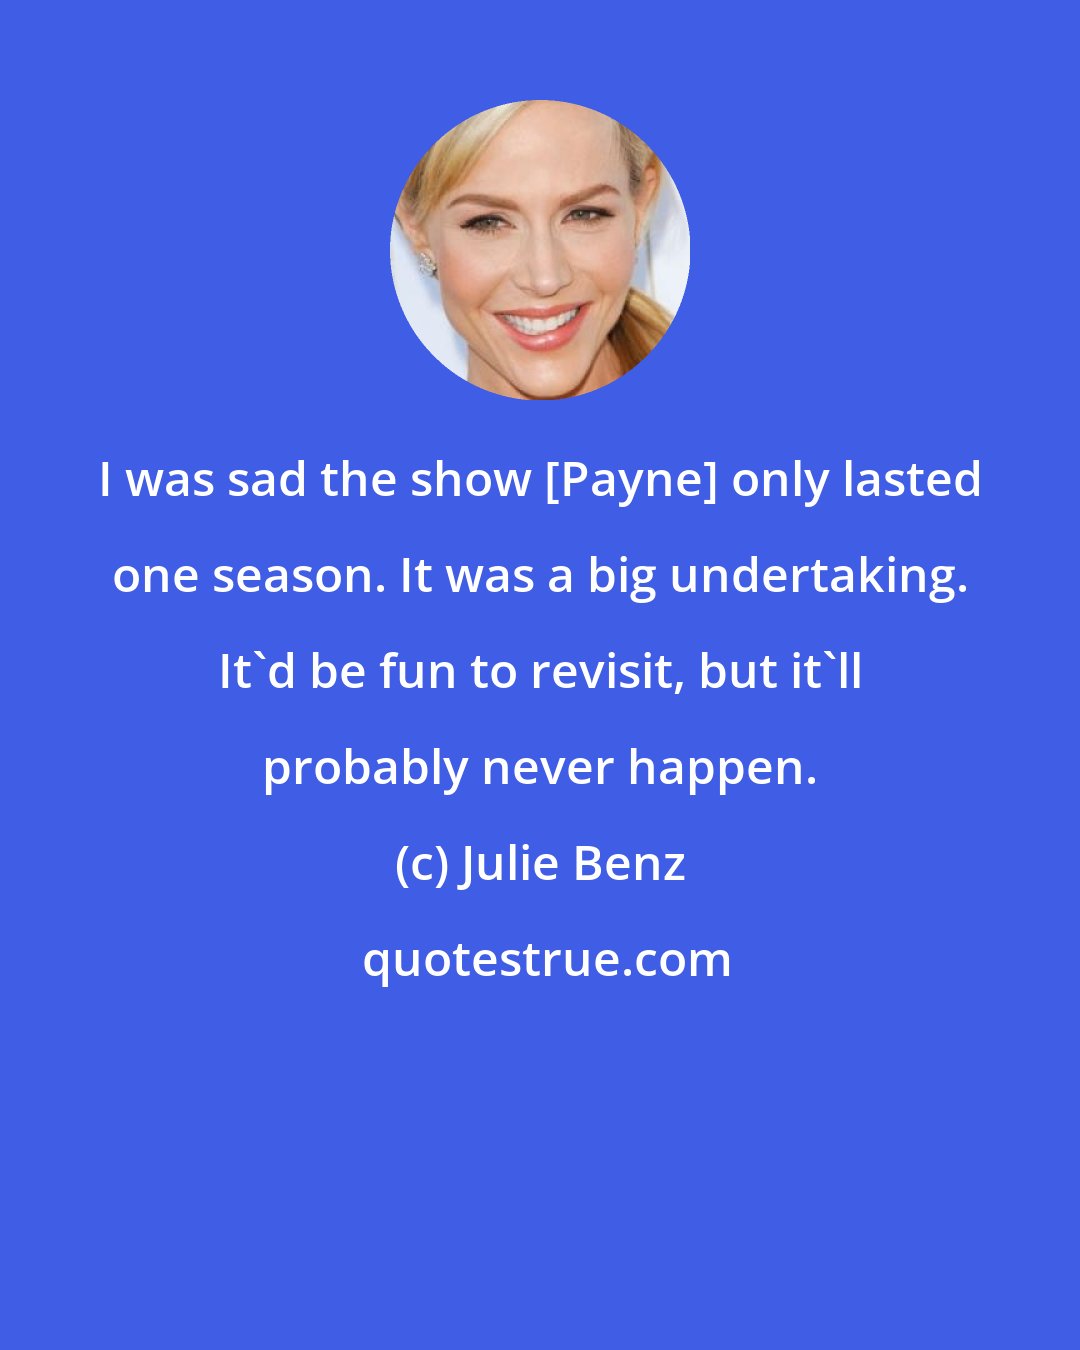 Julie Benz: I was sad the show [Payne] only lasted one season. It was a big undertaking. It'd be fun to revisit, but it'll probably never happen.